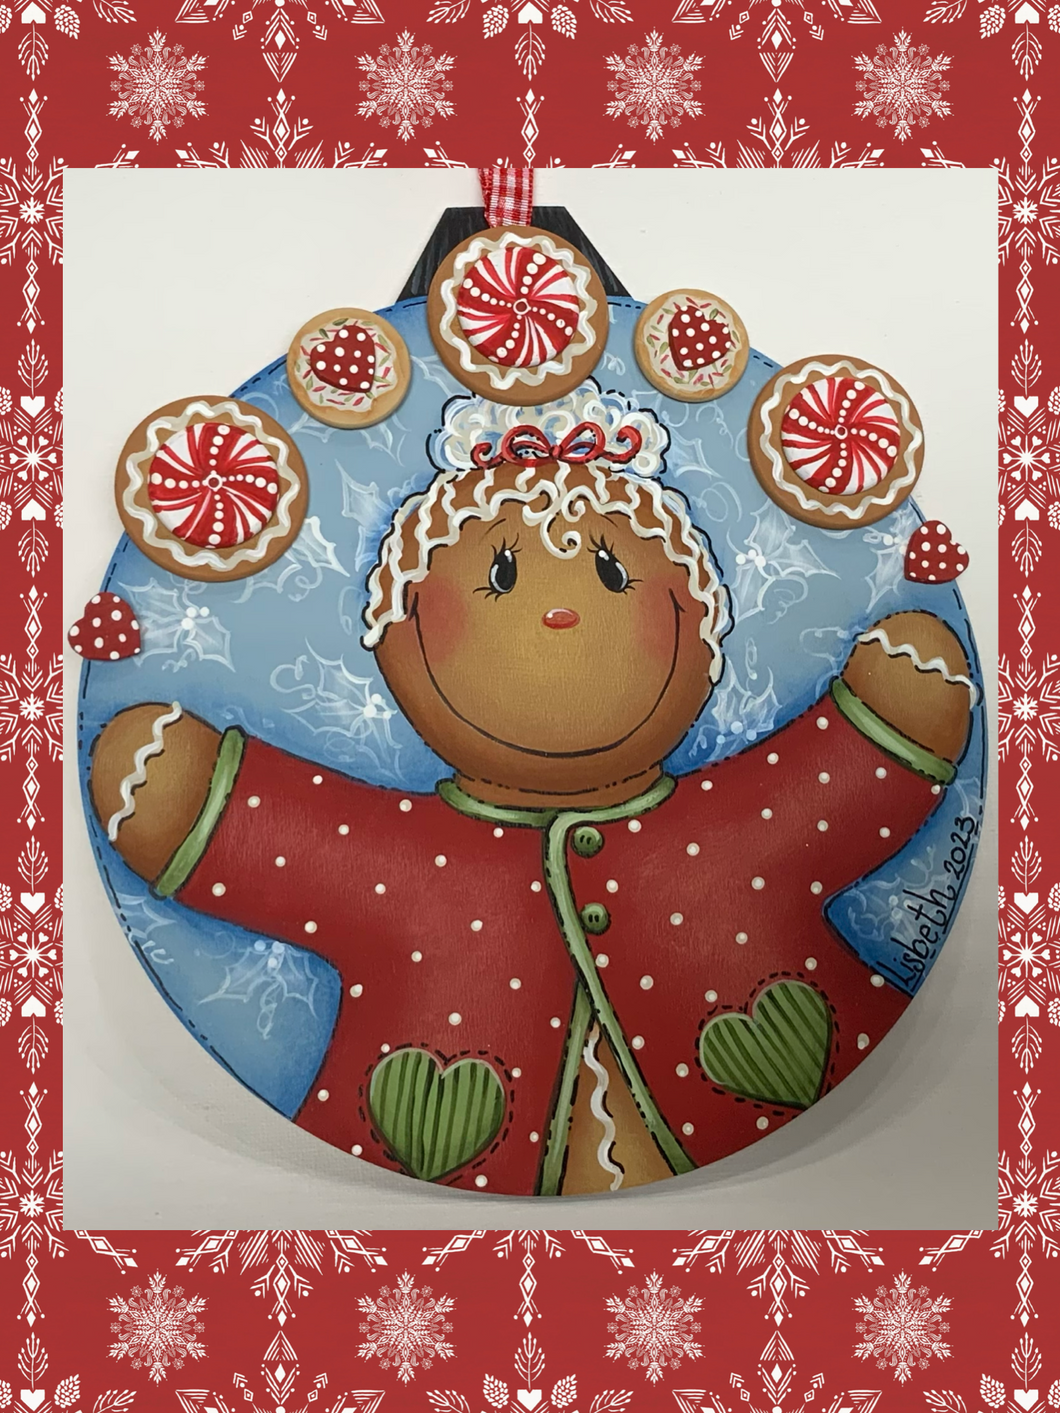 Ginger's Cookie Dreams Ornament Kit and Pattern